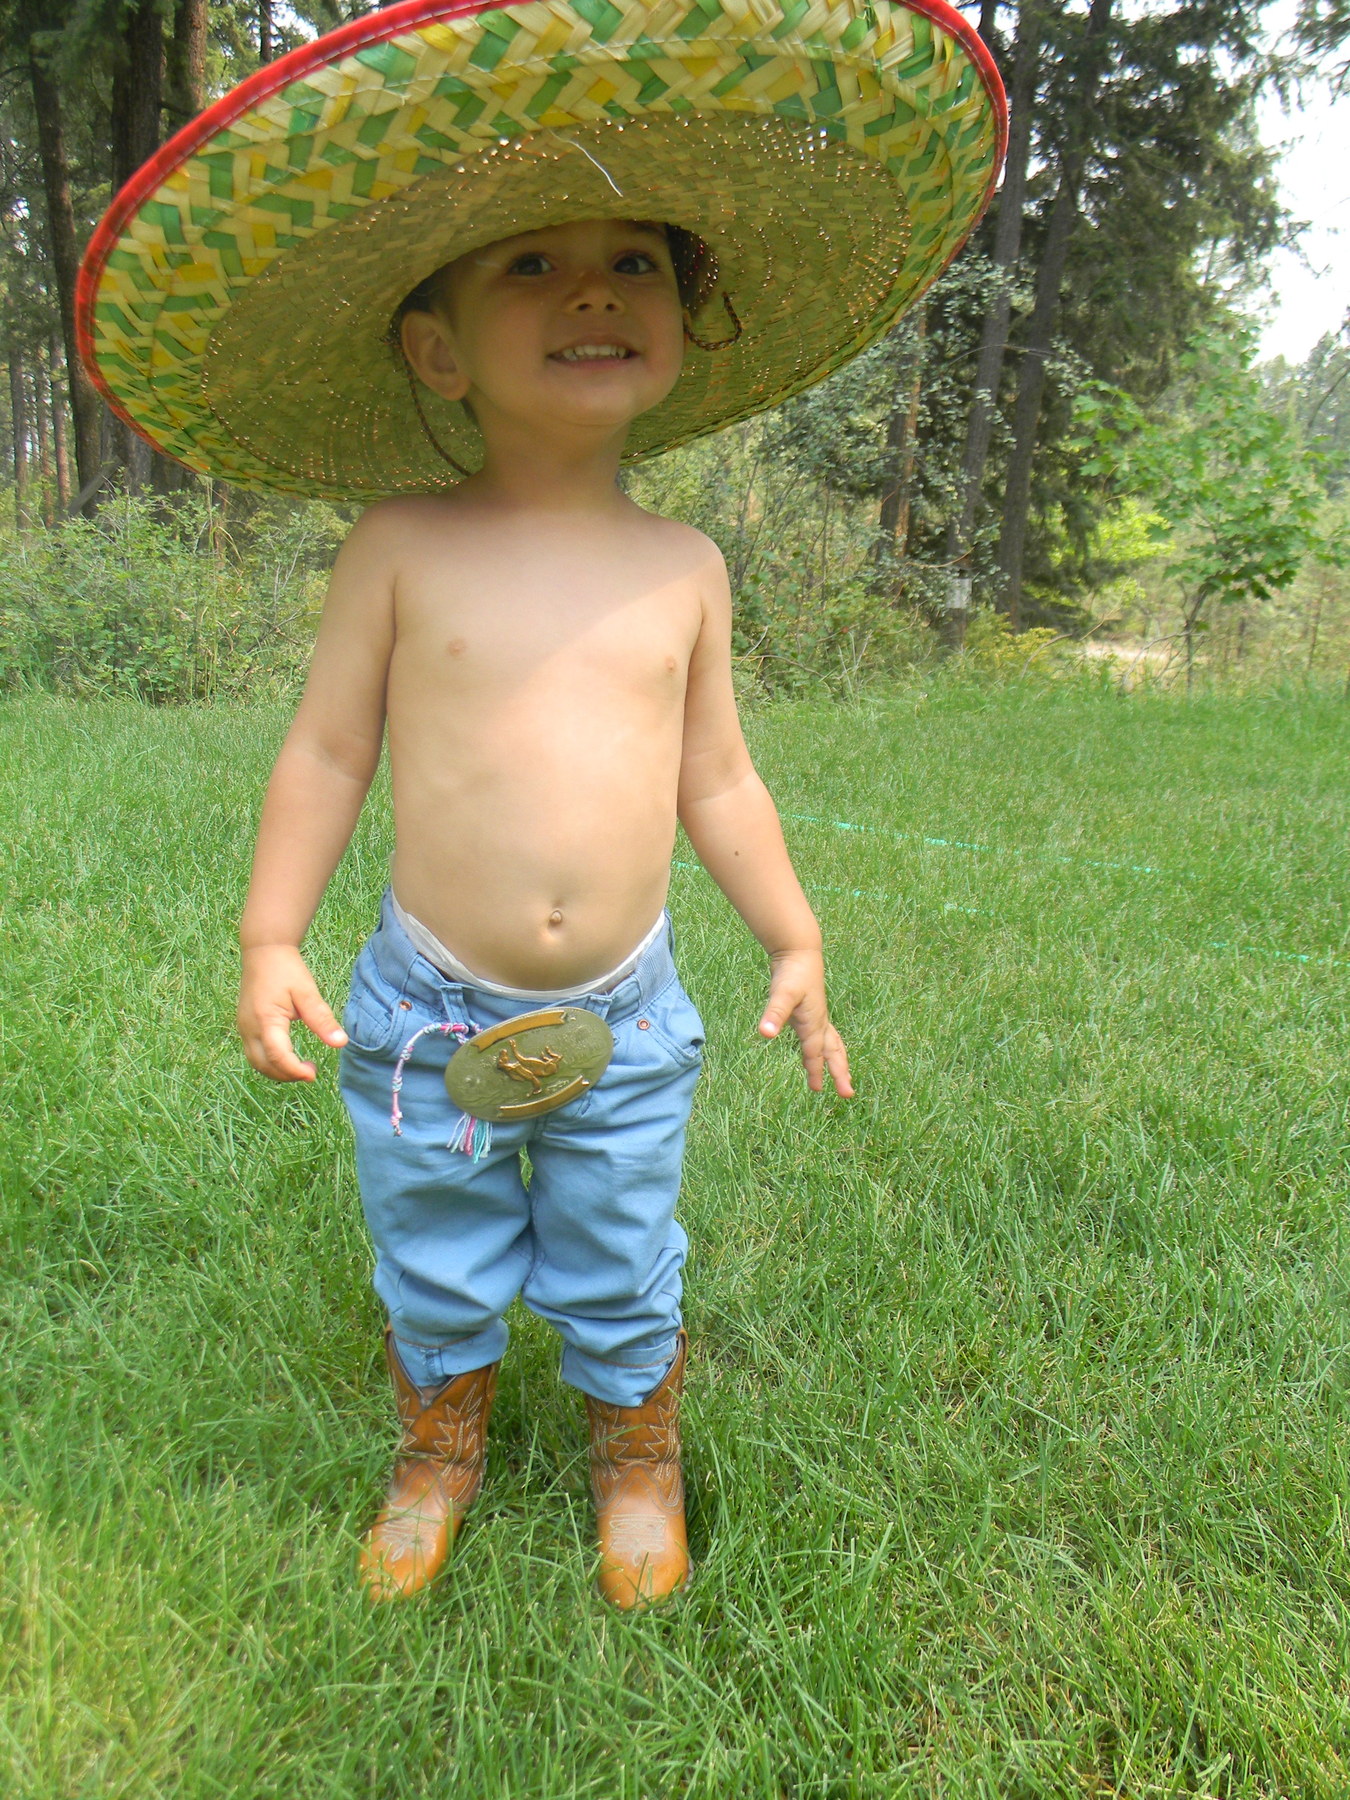 Our Mexican Cowboy Judah